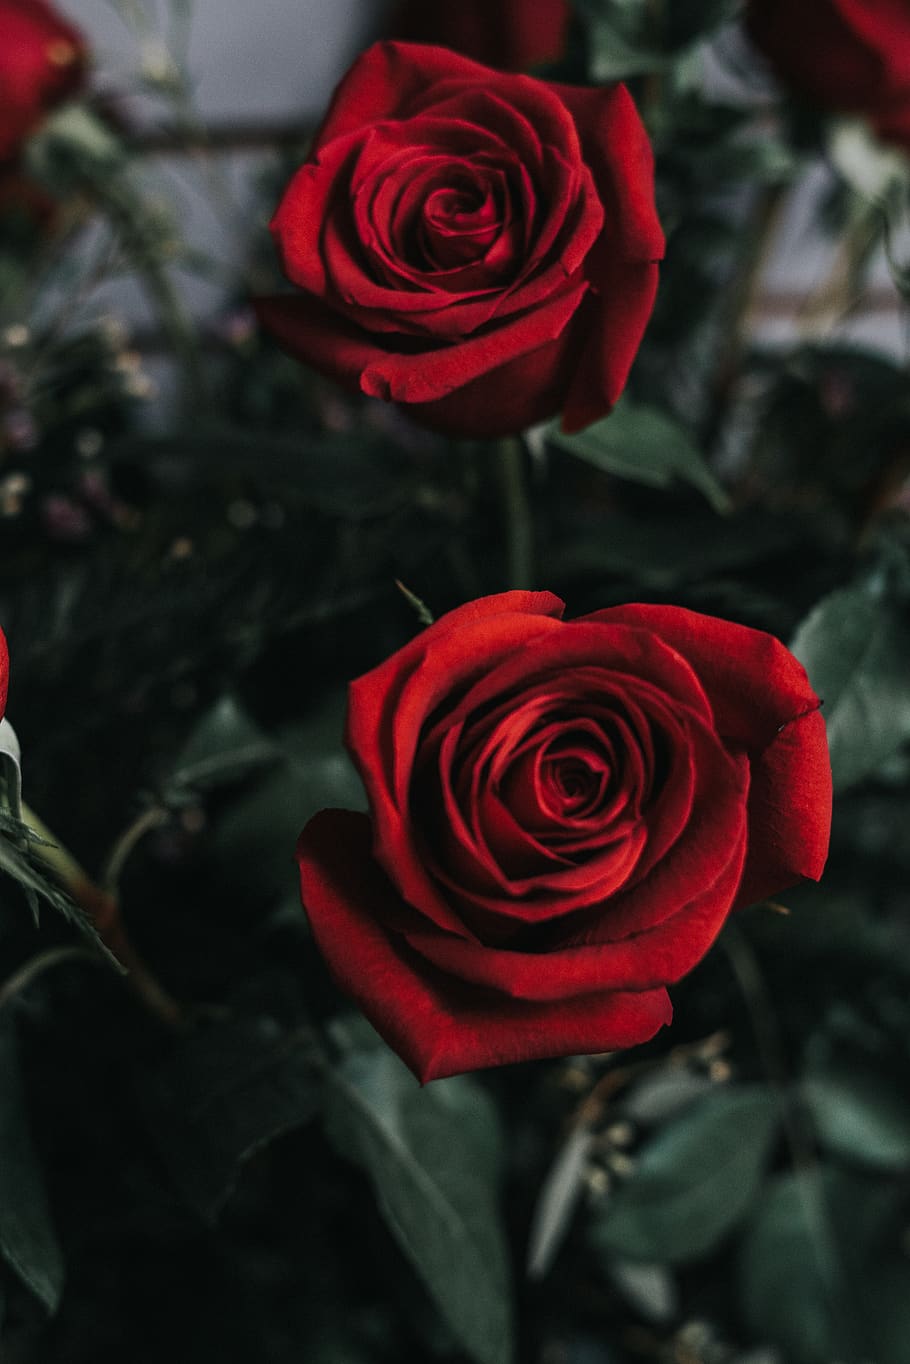 HD wallpaper: red roses, valentines day roses, wallpaper, flowers, beauty  in nature | Wallpaper Flare